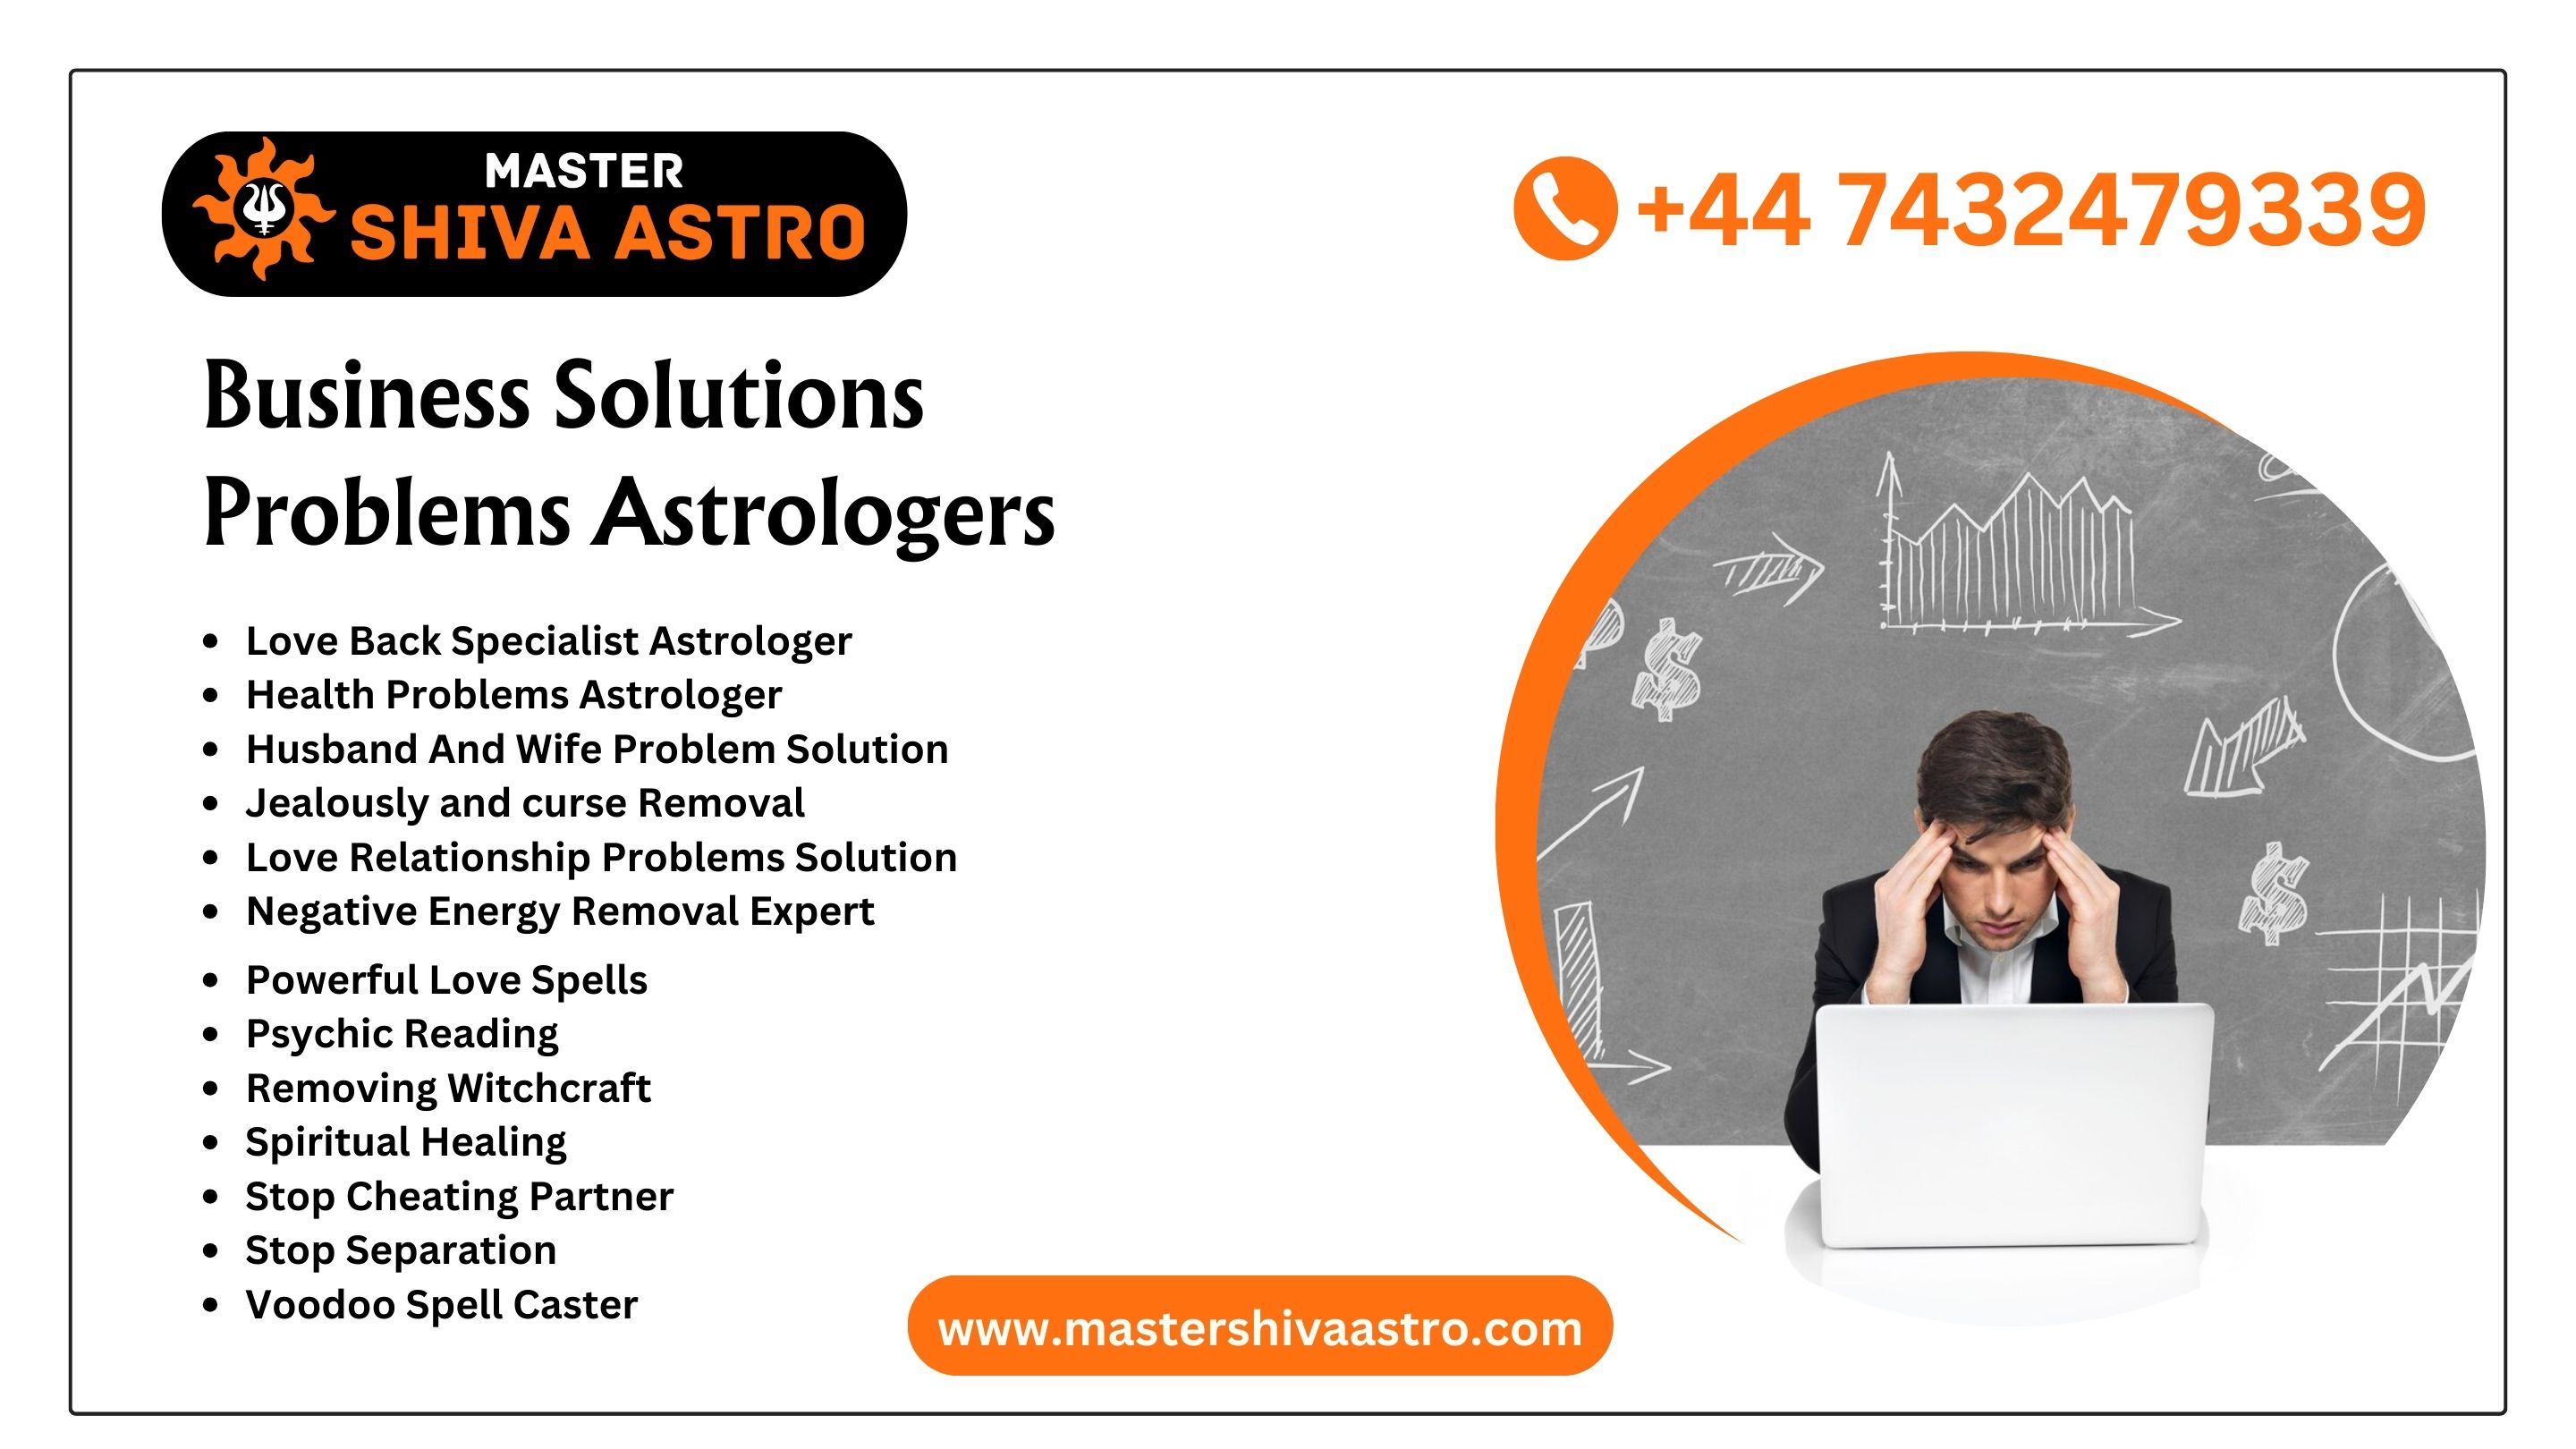 Business Solutions Problems Astrologers - Master Shiva